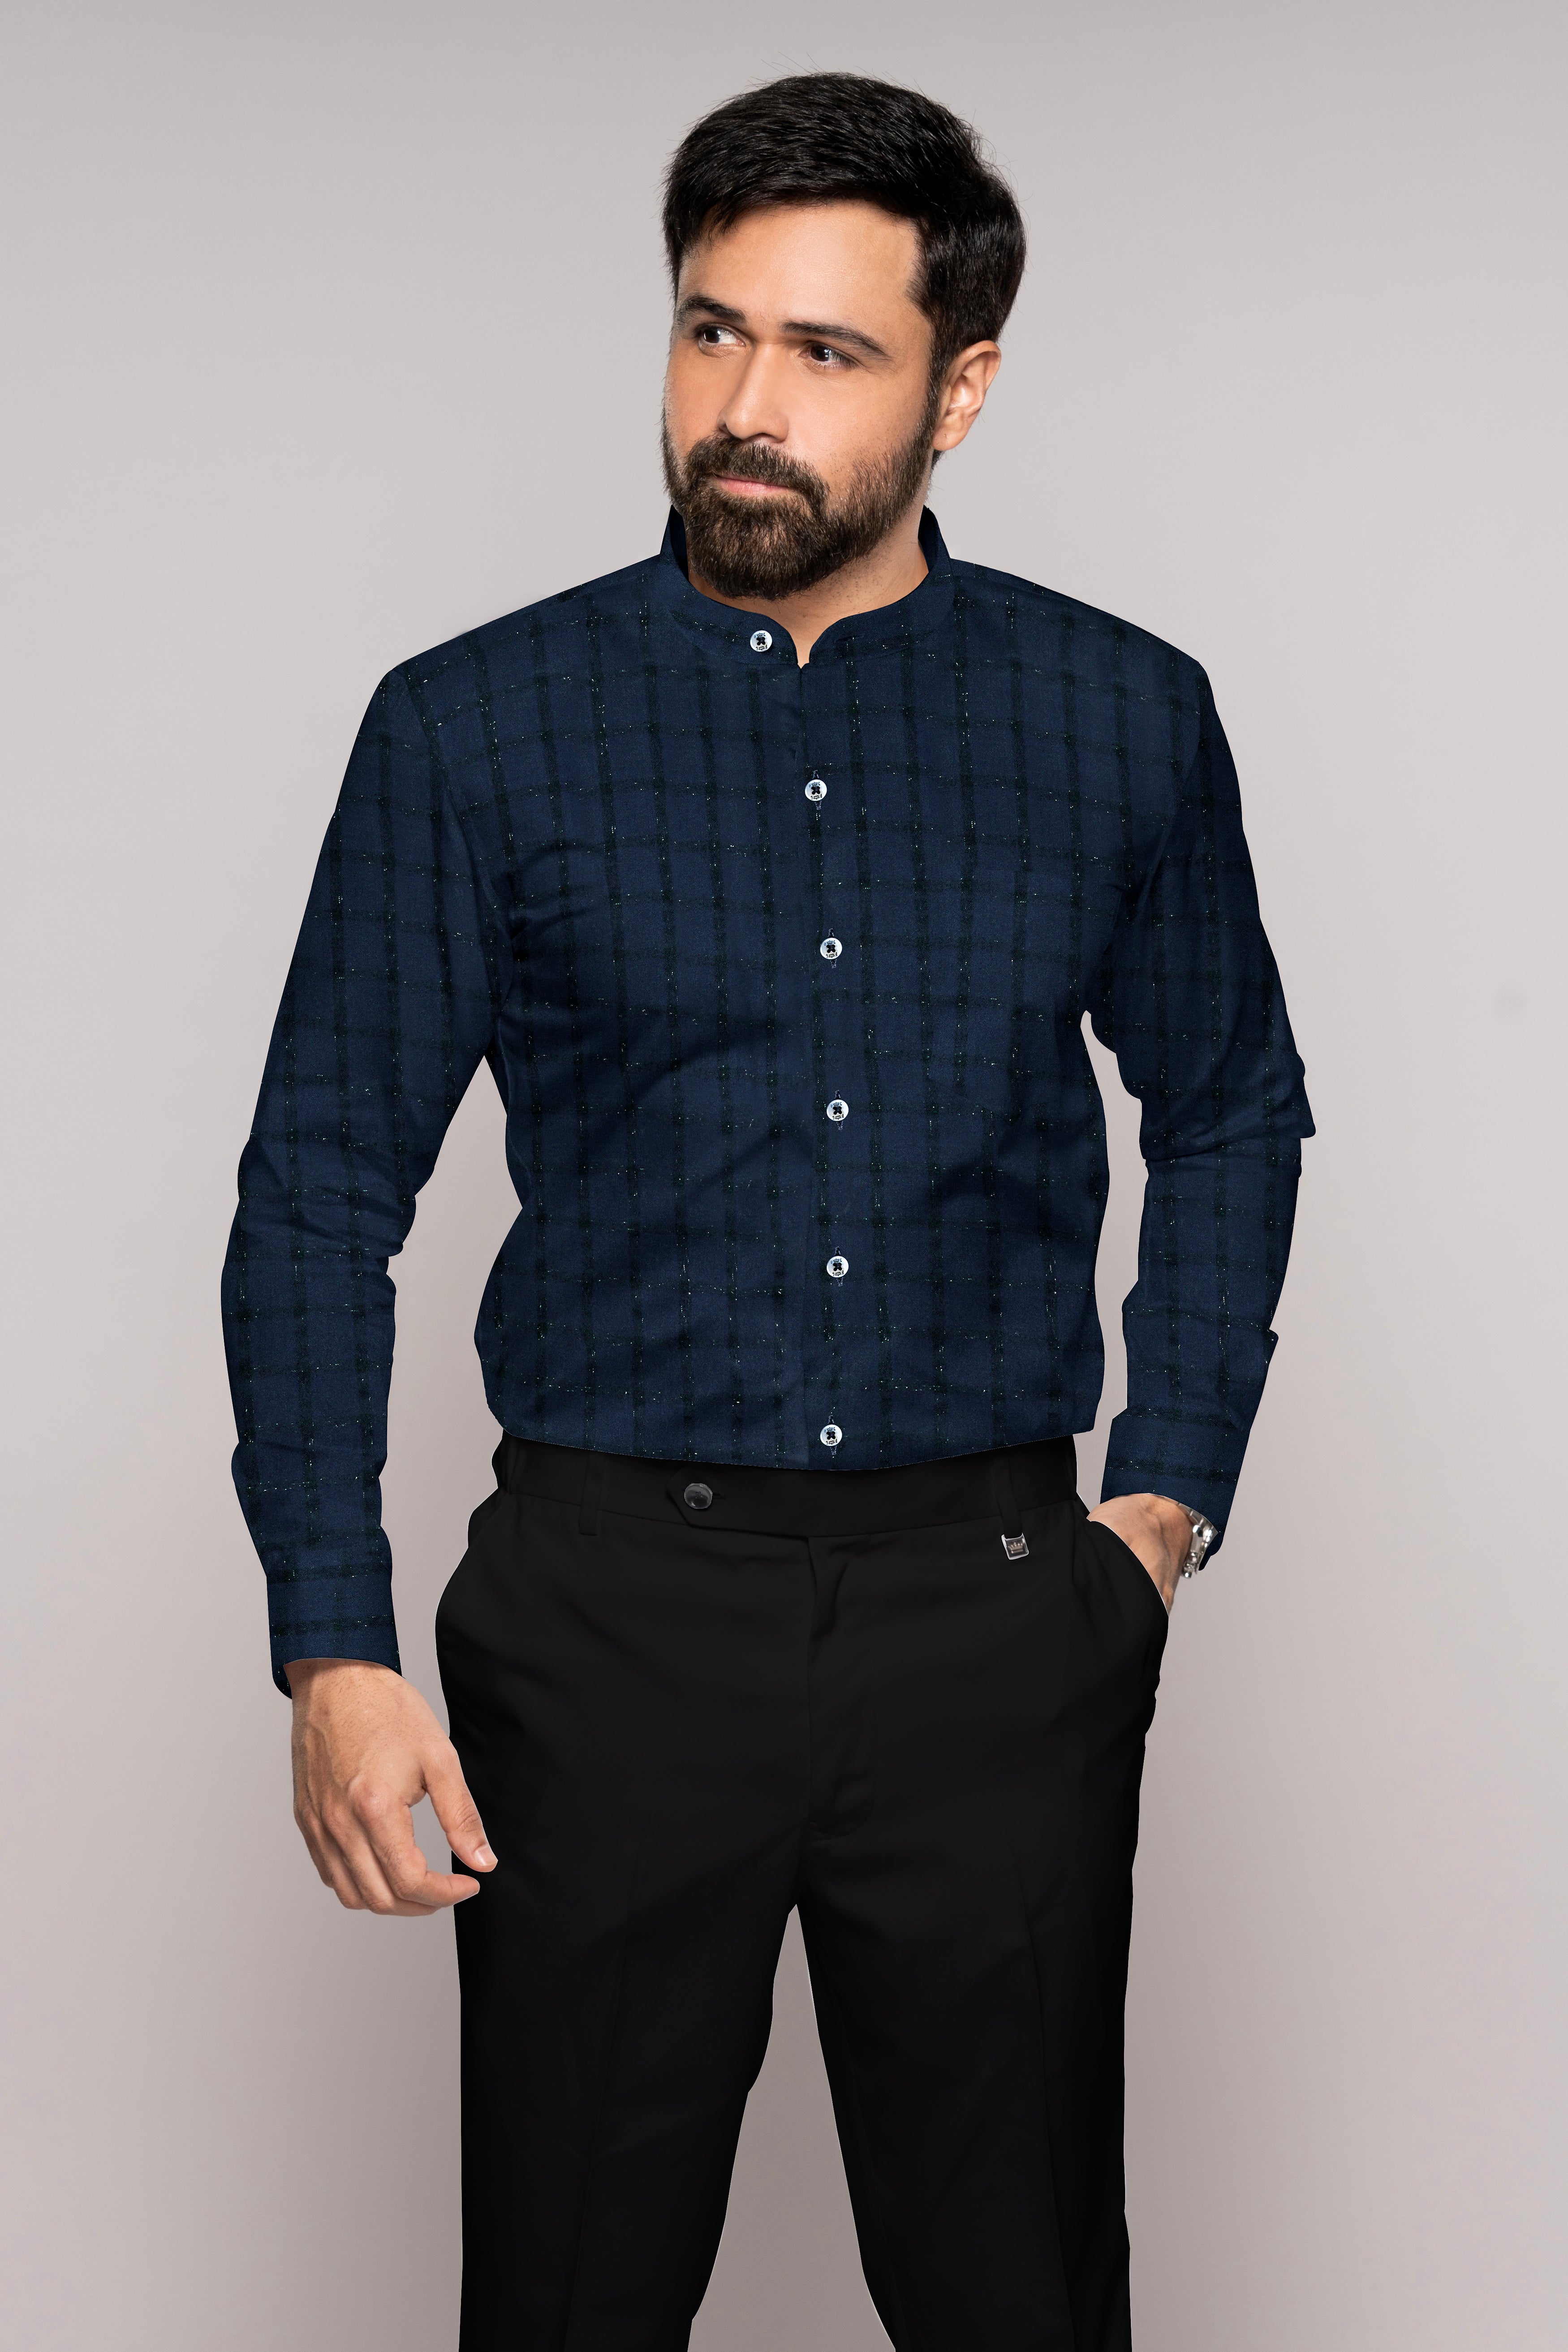 Yale Blue and Black Checkered Flannel Shirt